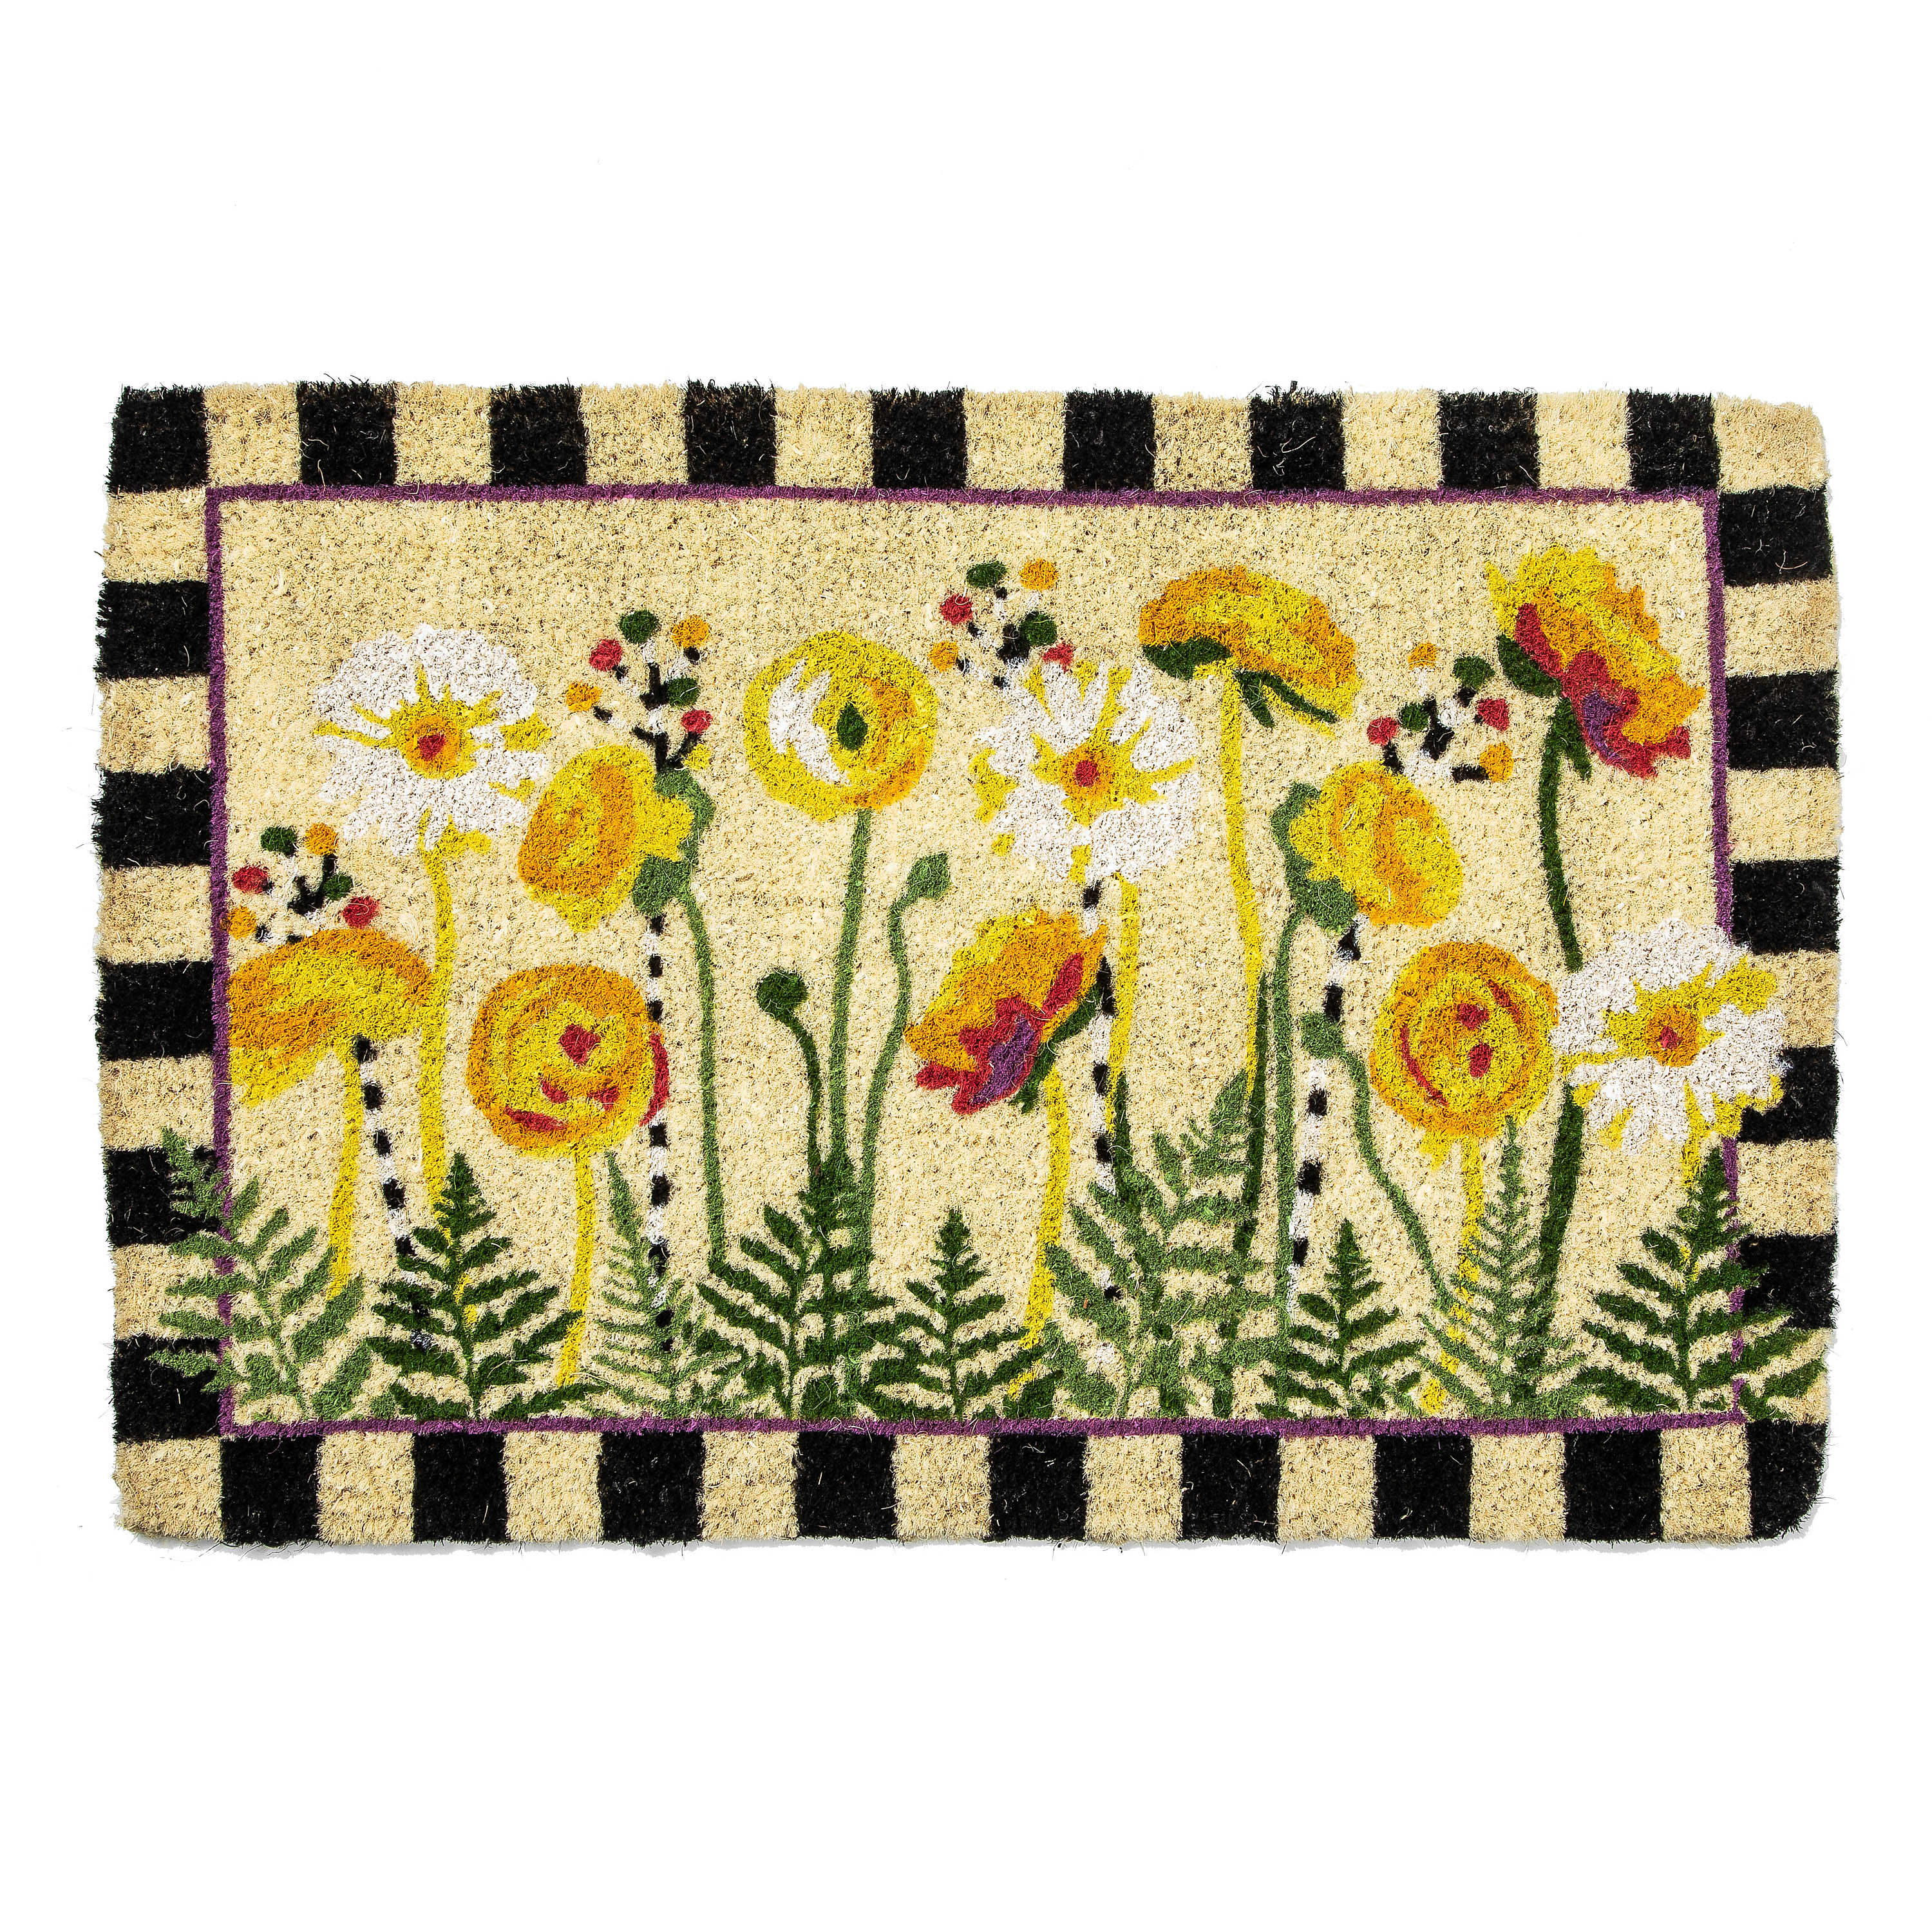 Everything is Coming Up Daisies Entrance Mat mackenzie-childs Panama 0